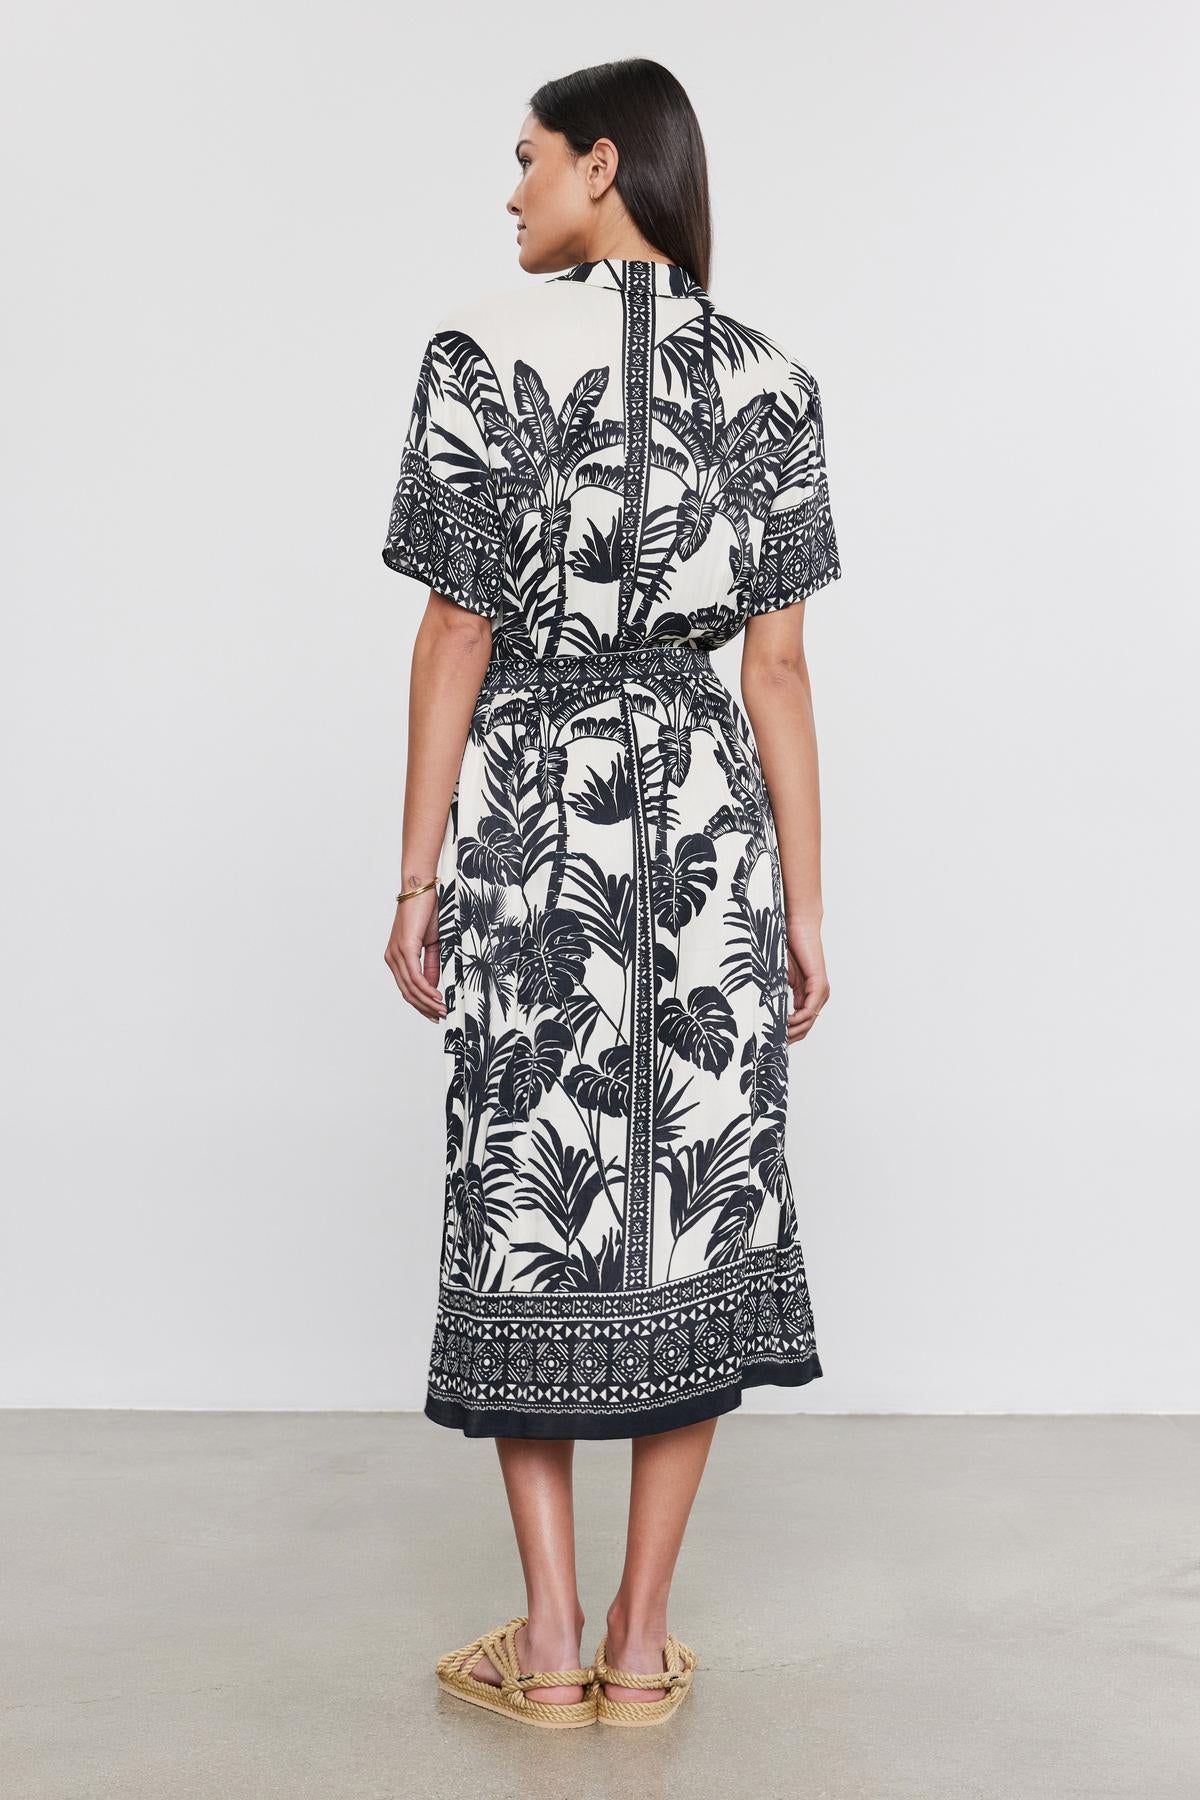   Woman in a black and white palm print FREYA DRESS by Velvet by Graham & Spencer, with a belted waist, standing in profile view against a neutral background. 